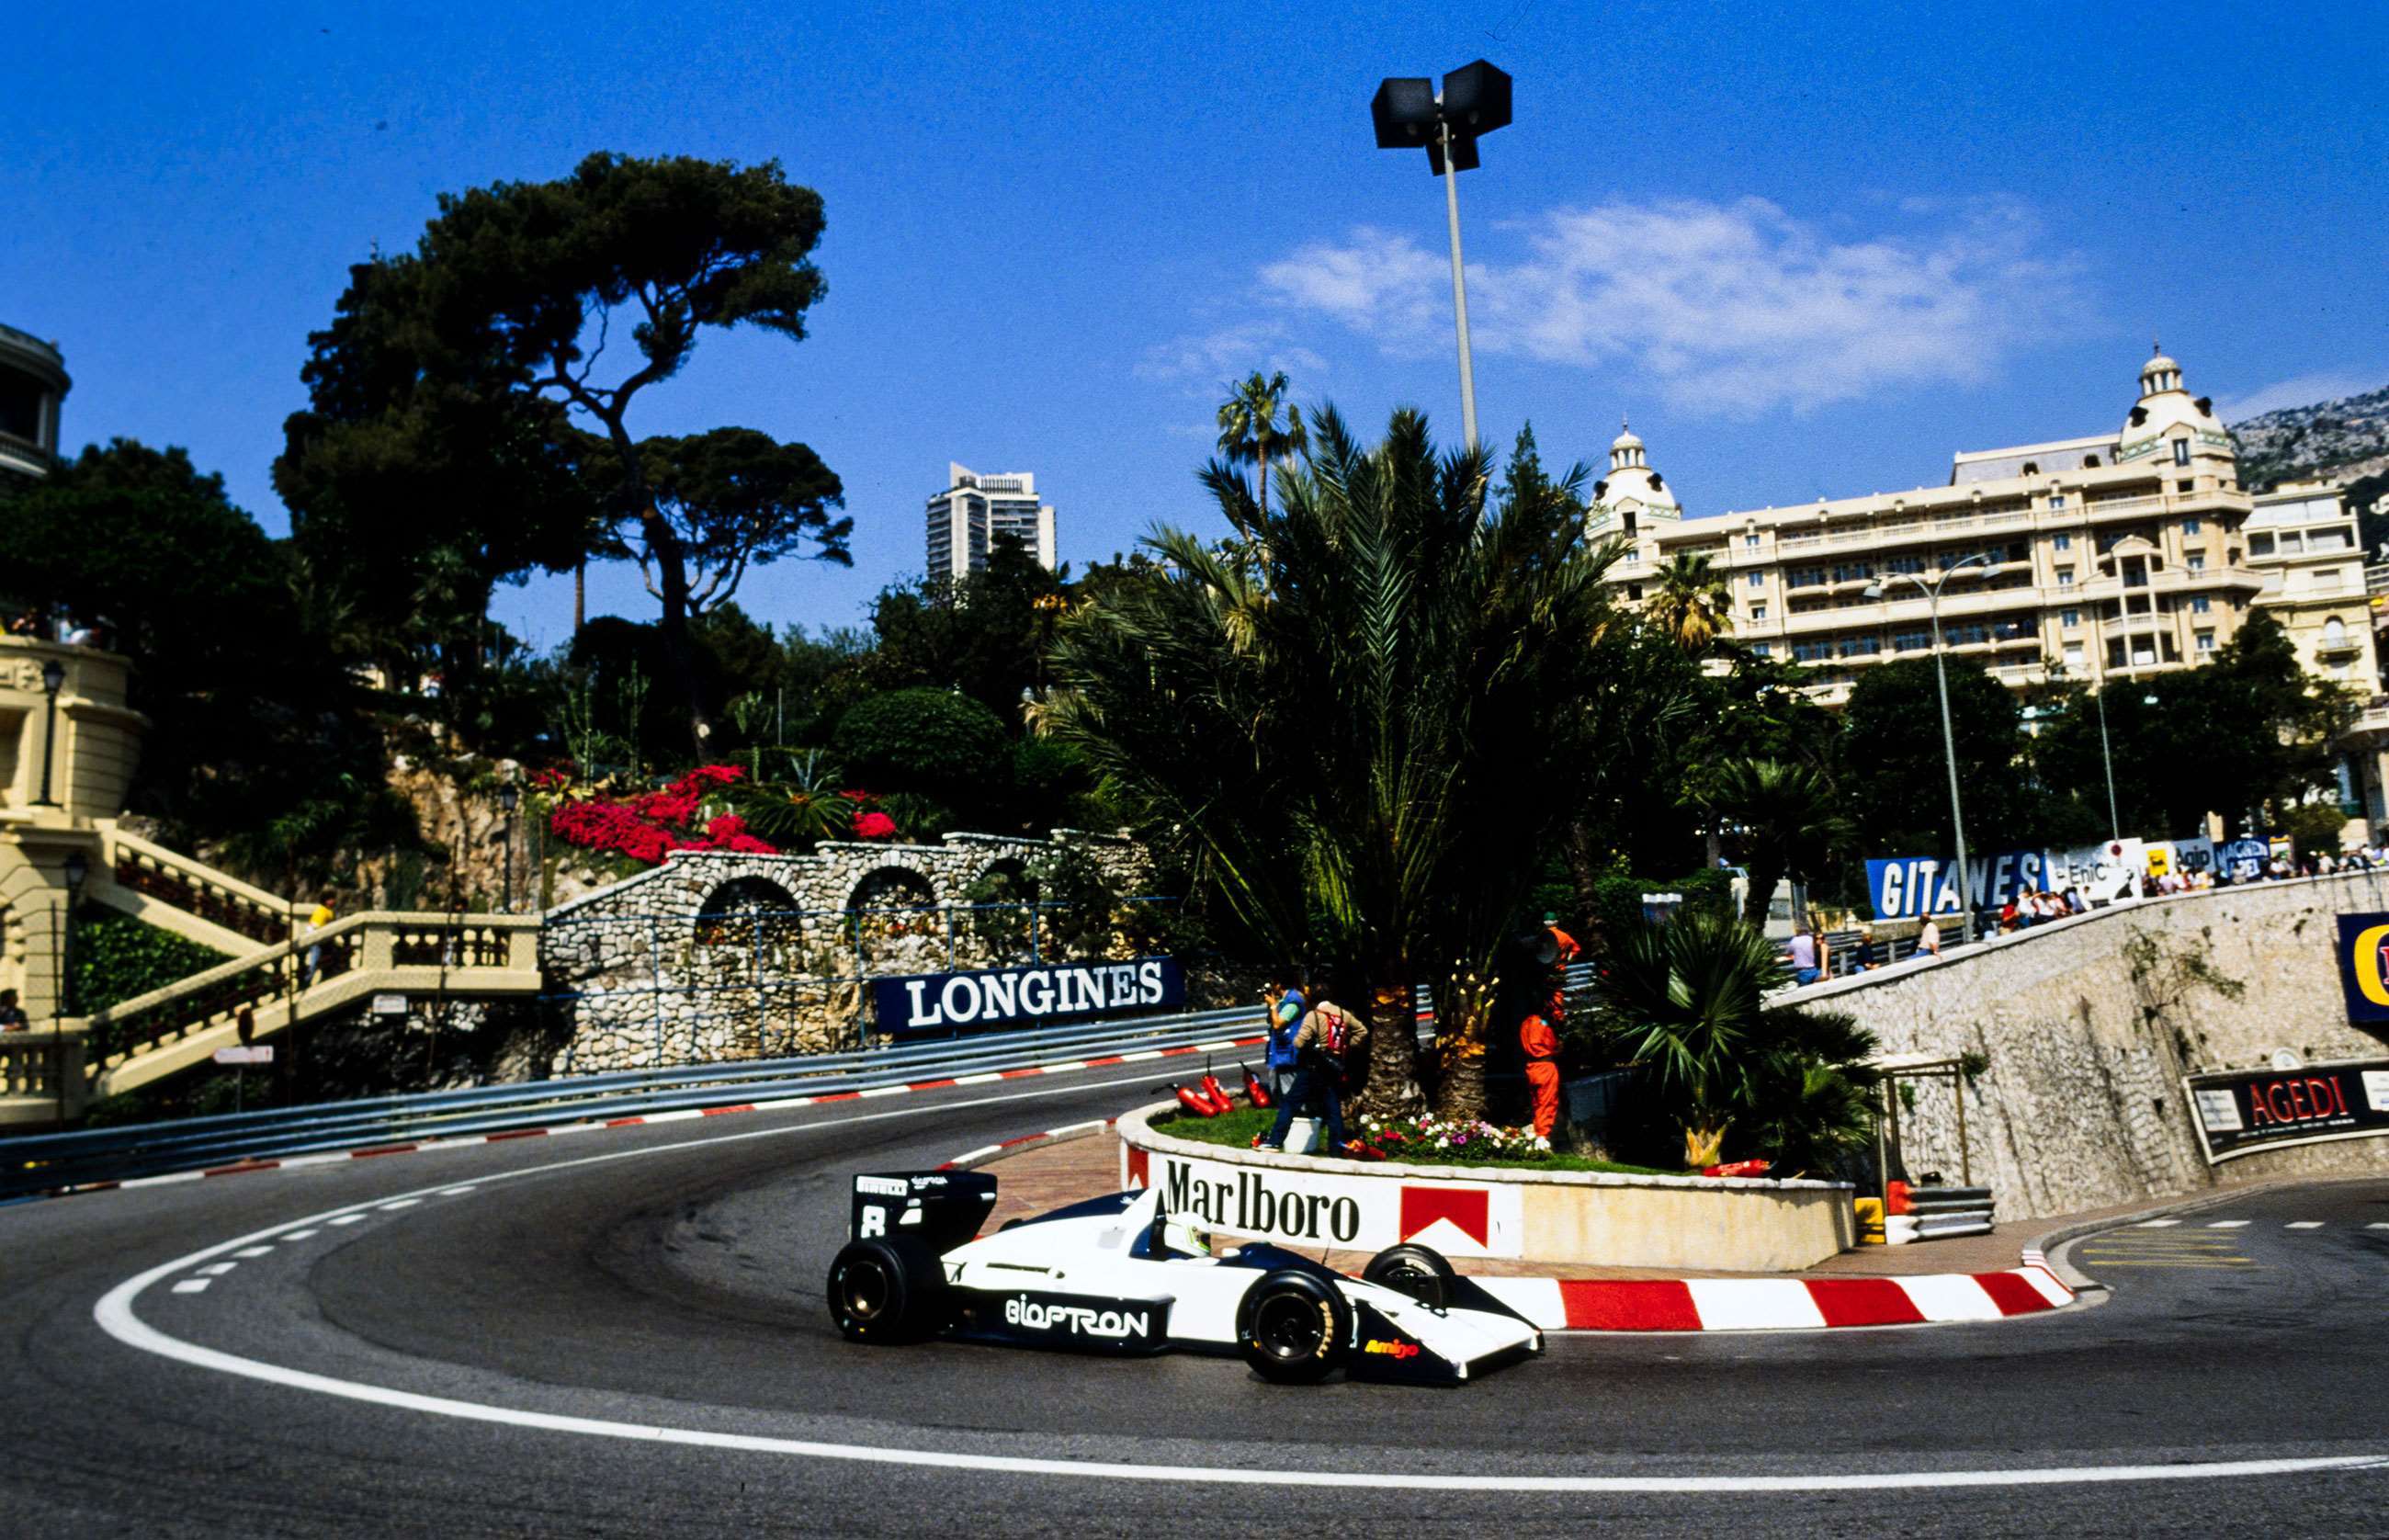 Second place at Monaco, 1989. Modena in his Brabham BT58.